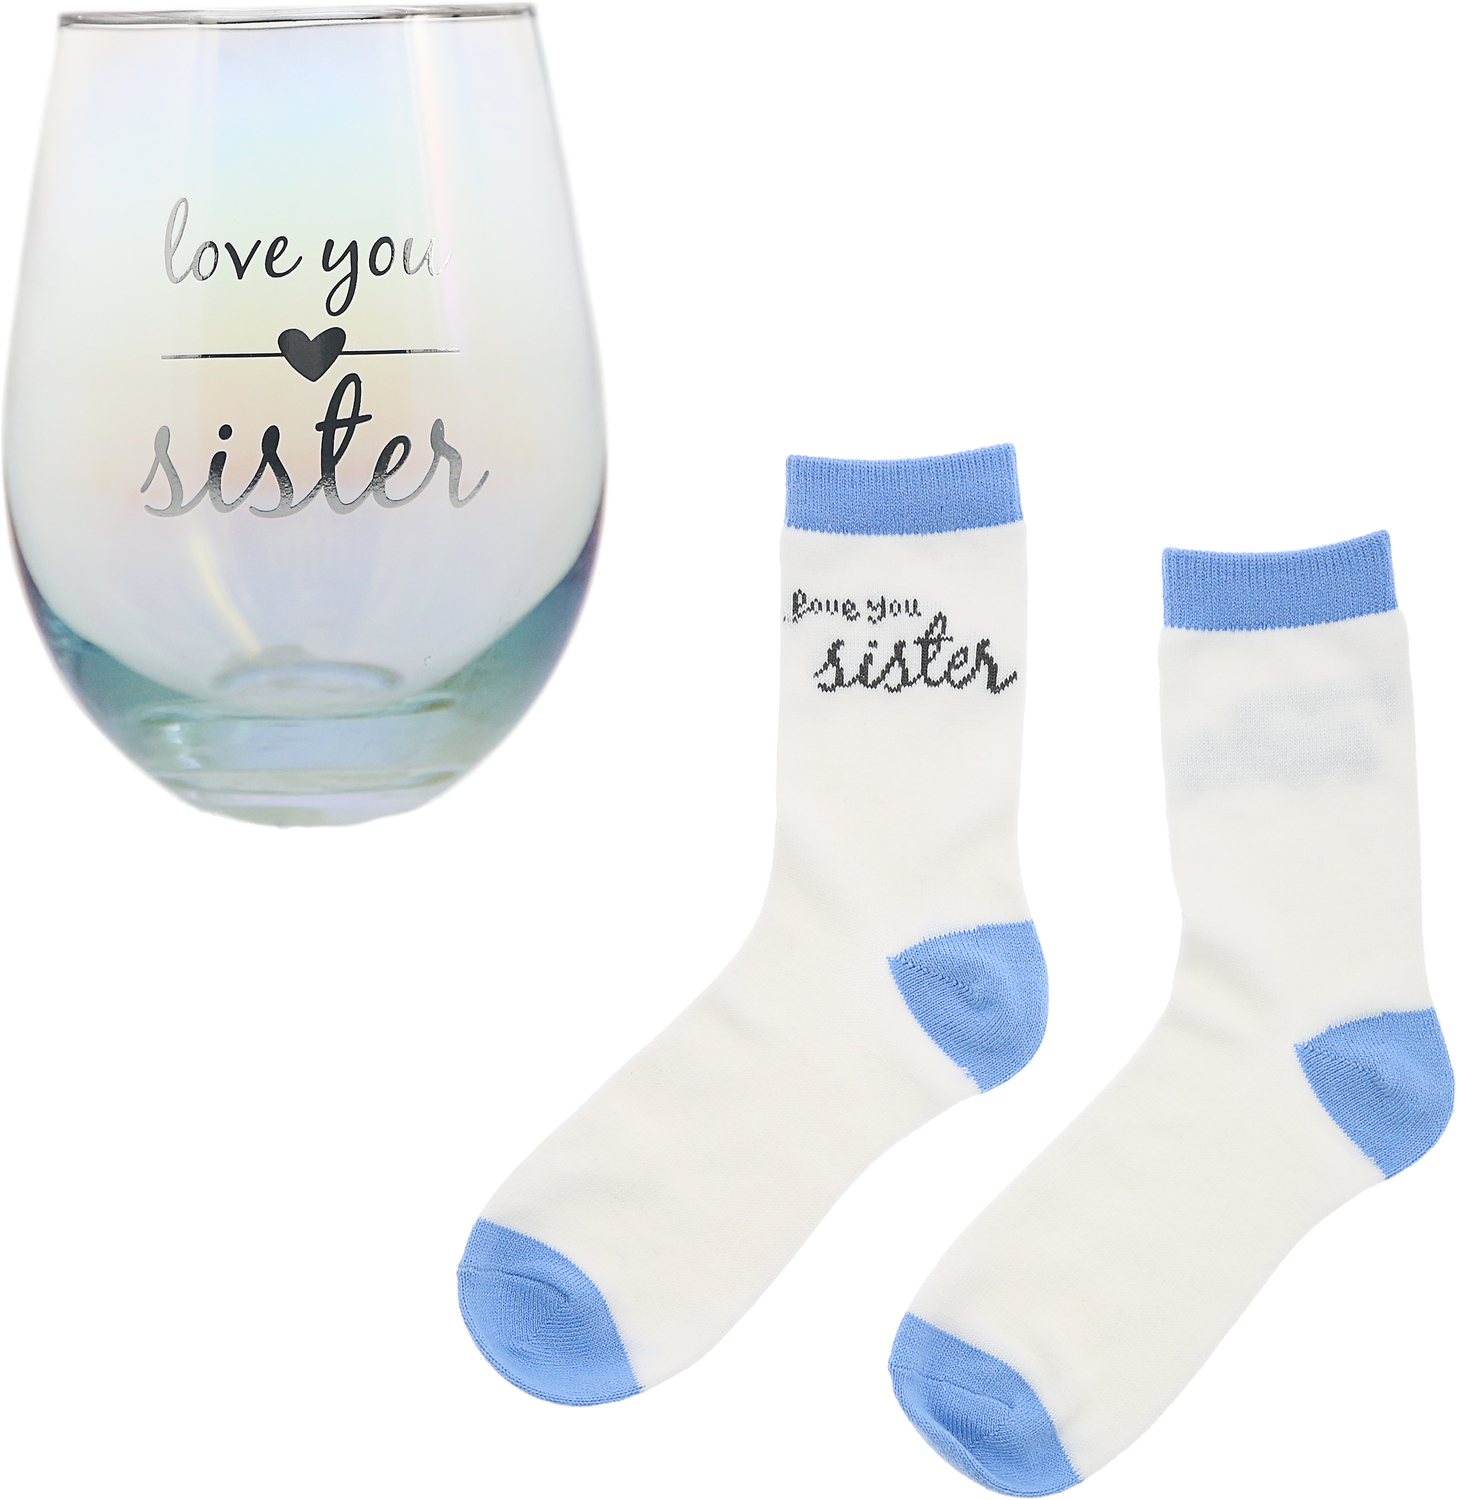 Sister by Warm and Fuzzy - Sister - 18 oz Stemless Glass & Sock Set